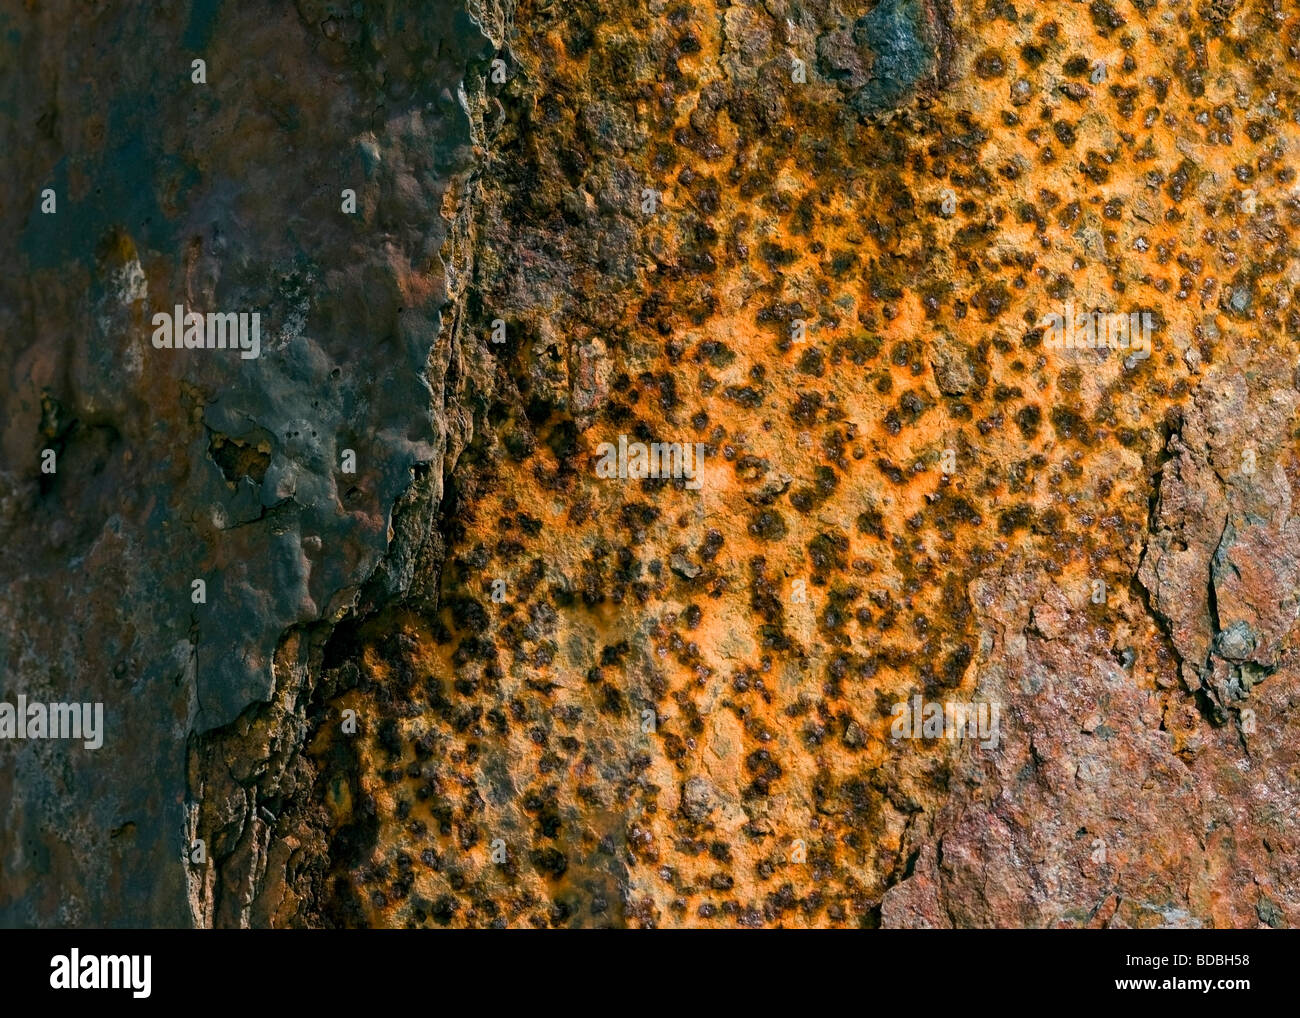 Colour, shape, form and texture on an oxidized iron pipe Stock Photo